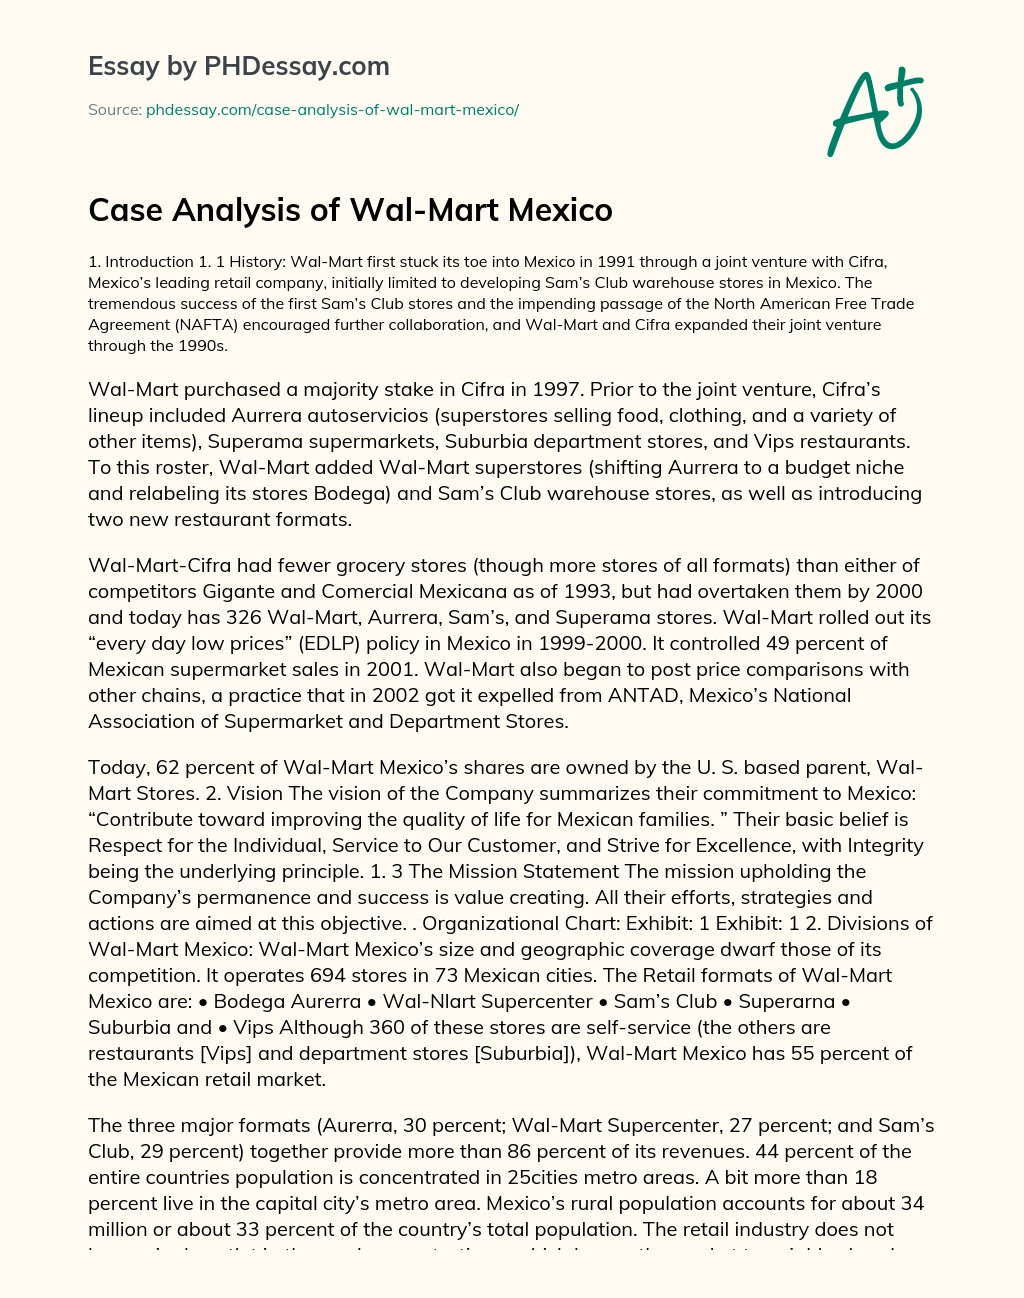 Case Analysis of Wal-Mart Mexico essay